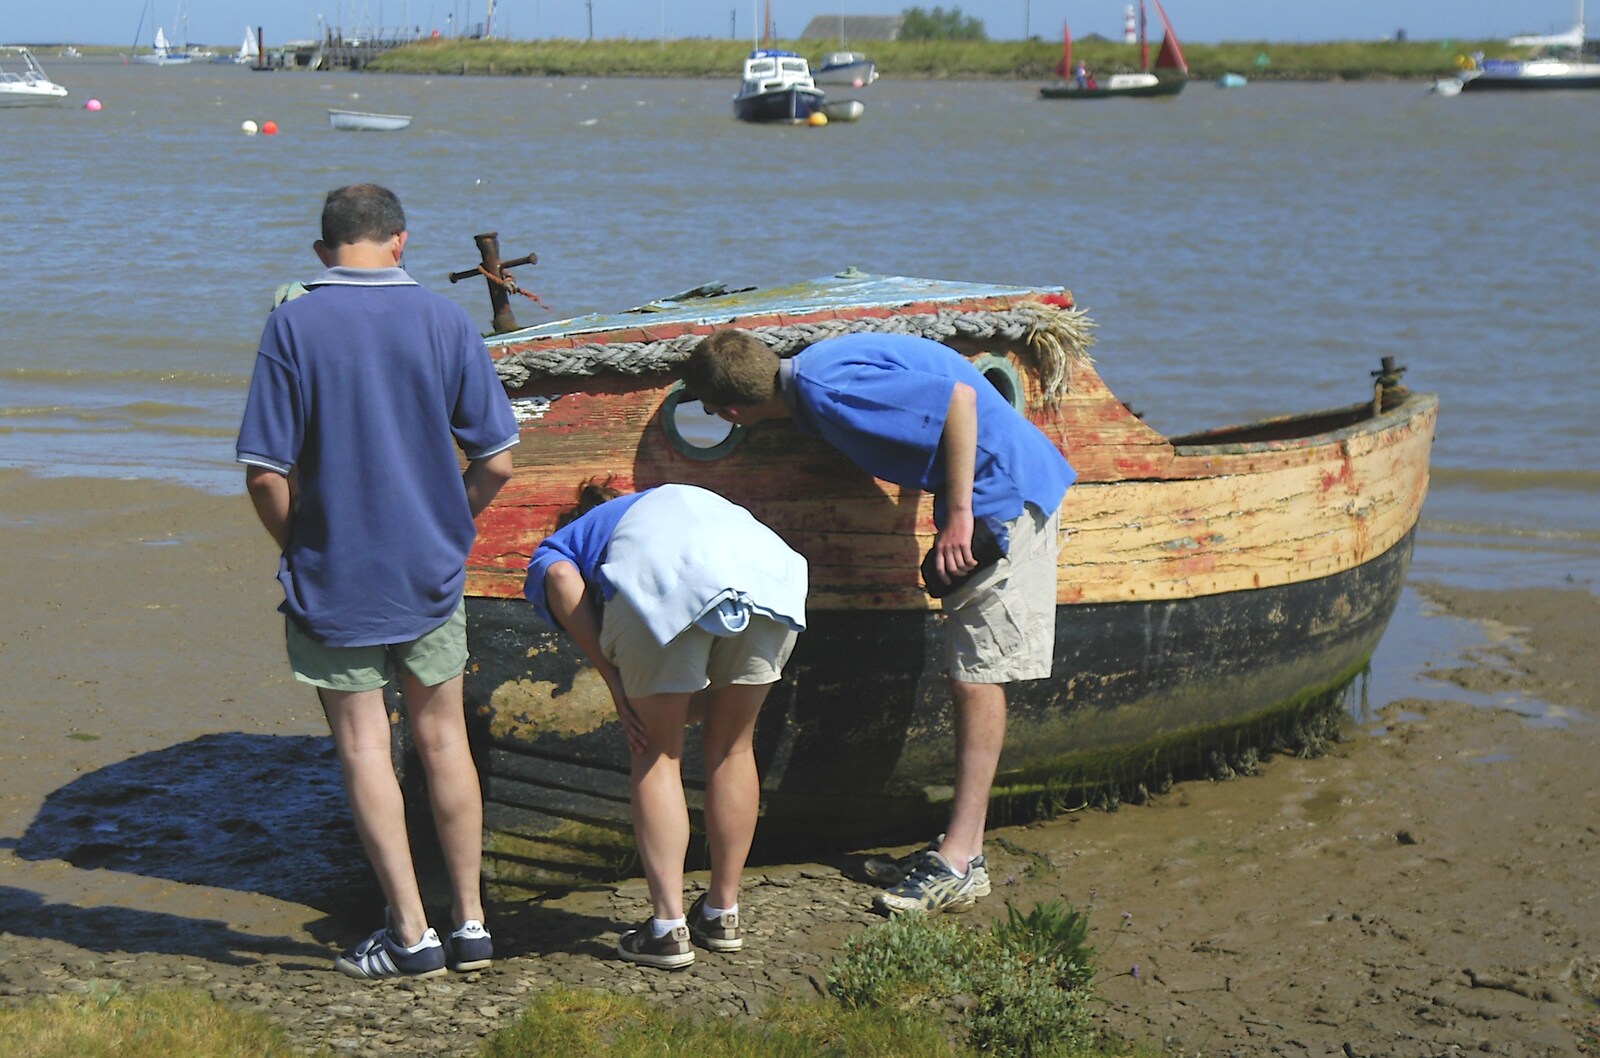 A small boat is inspected from The BSCC Charity Bike Ride, Orford, Suffolk - 15th July 2006